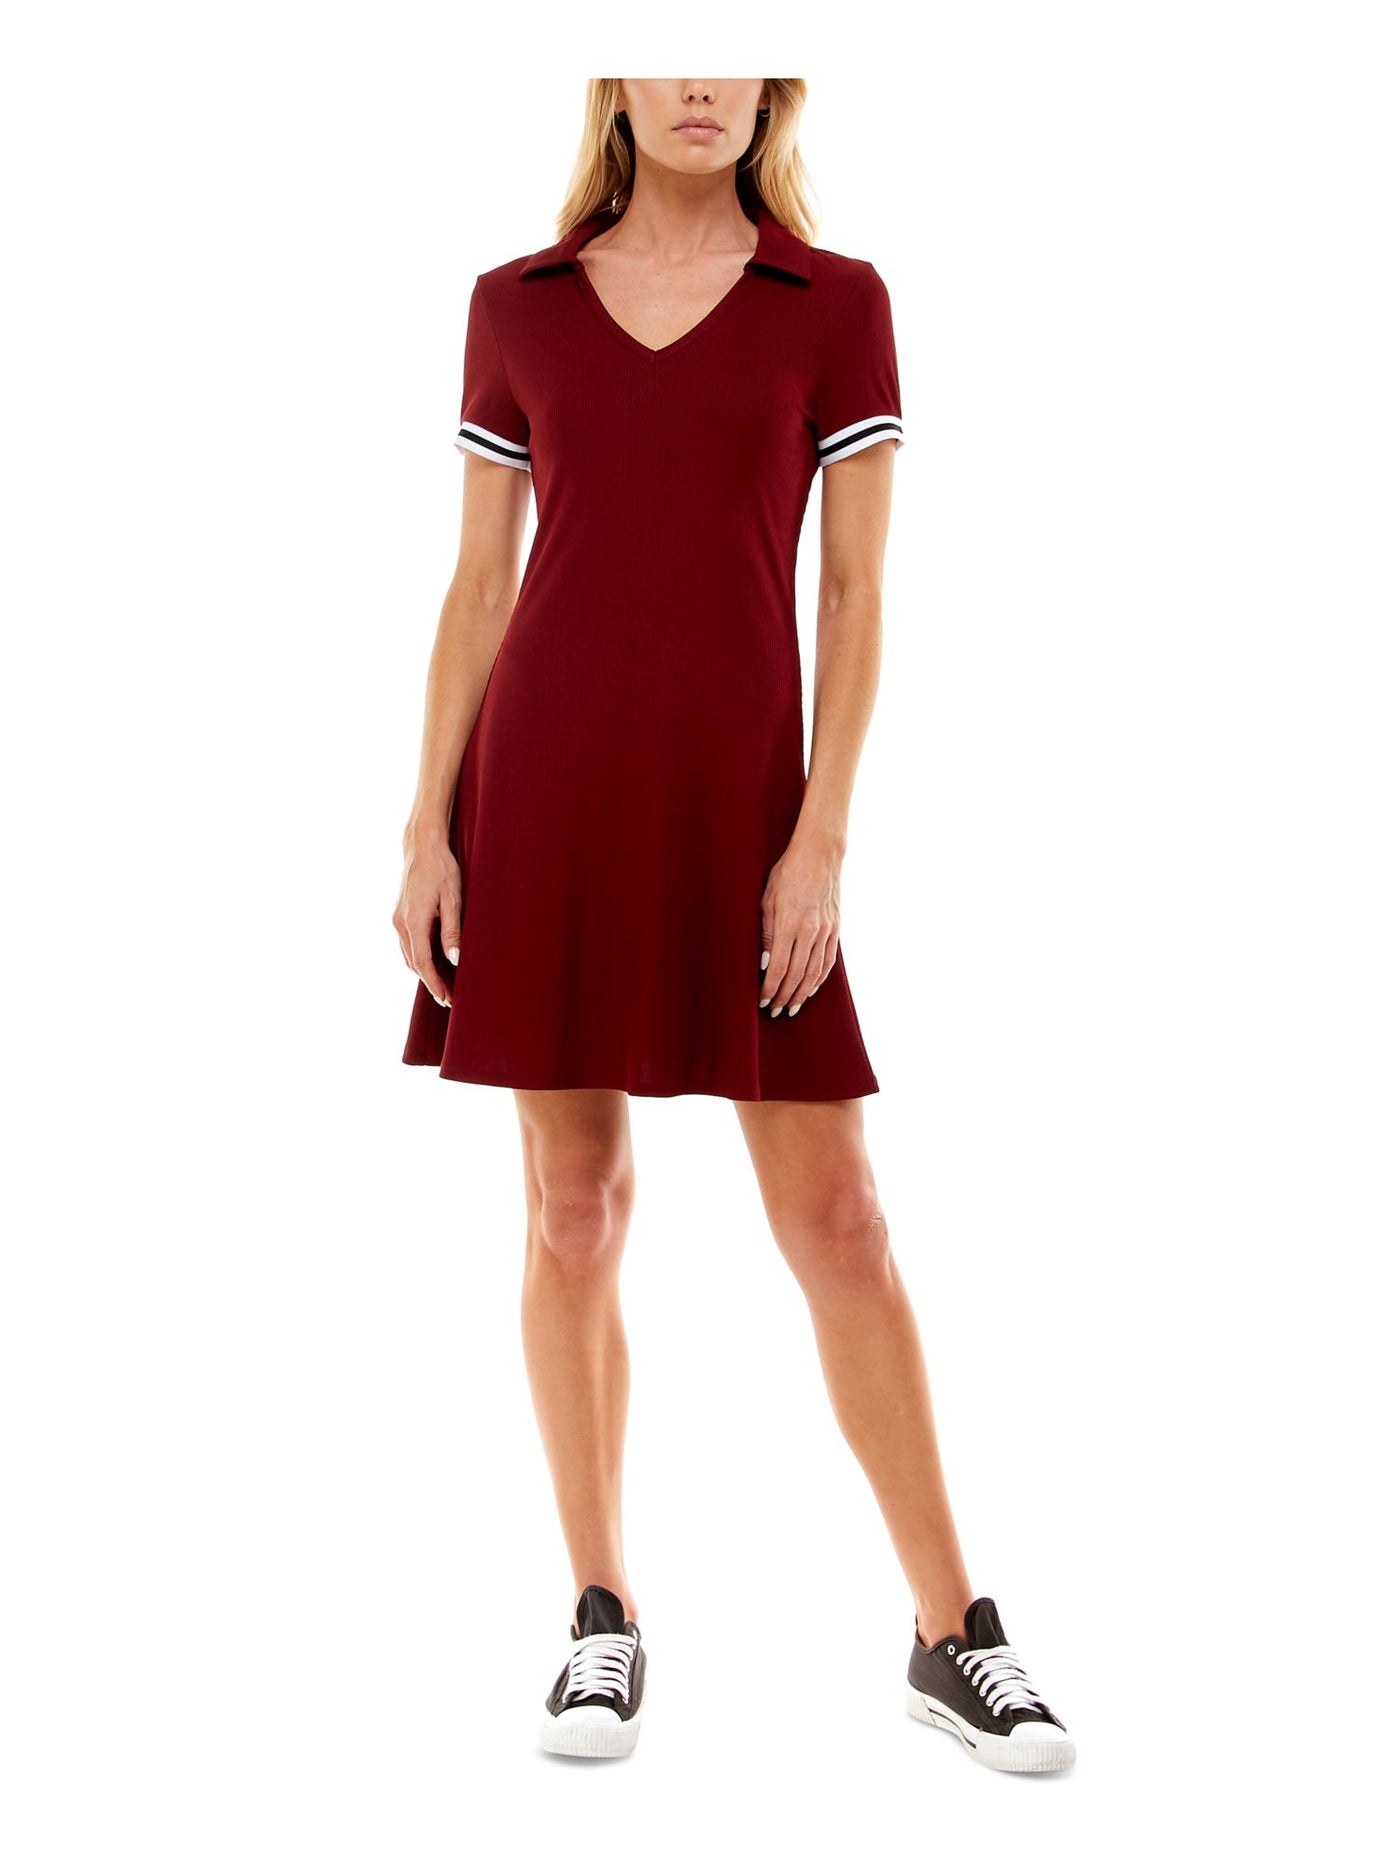 ALMOST FAMOUS Womens Burgundy Stretch Fitted Unlined Pullover Collared Above The Knee Fit + Flare Dress Juniors L